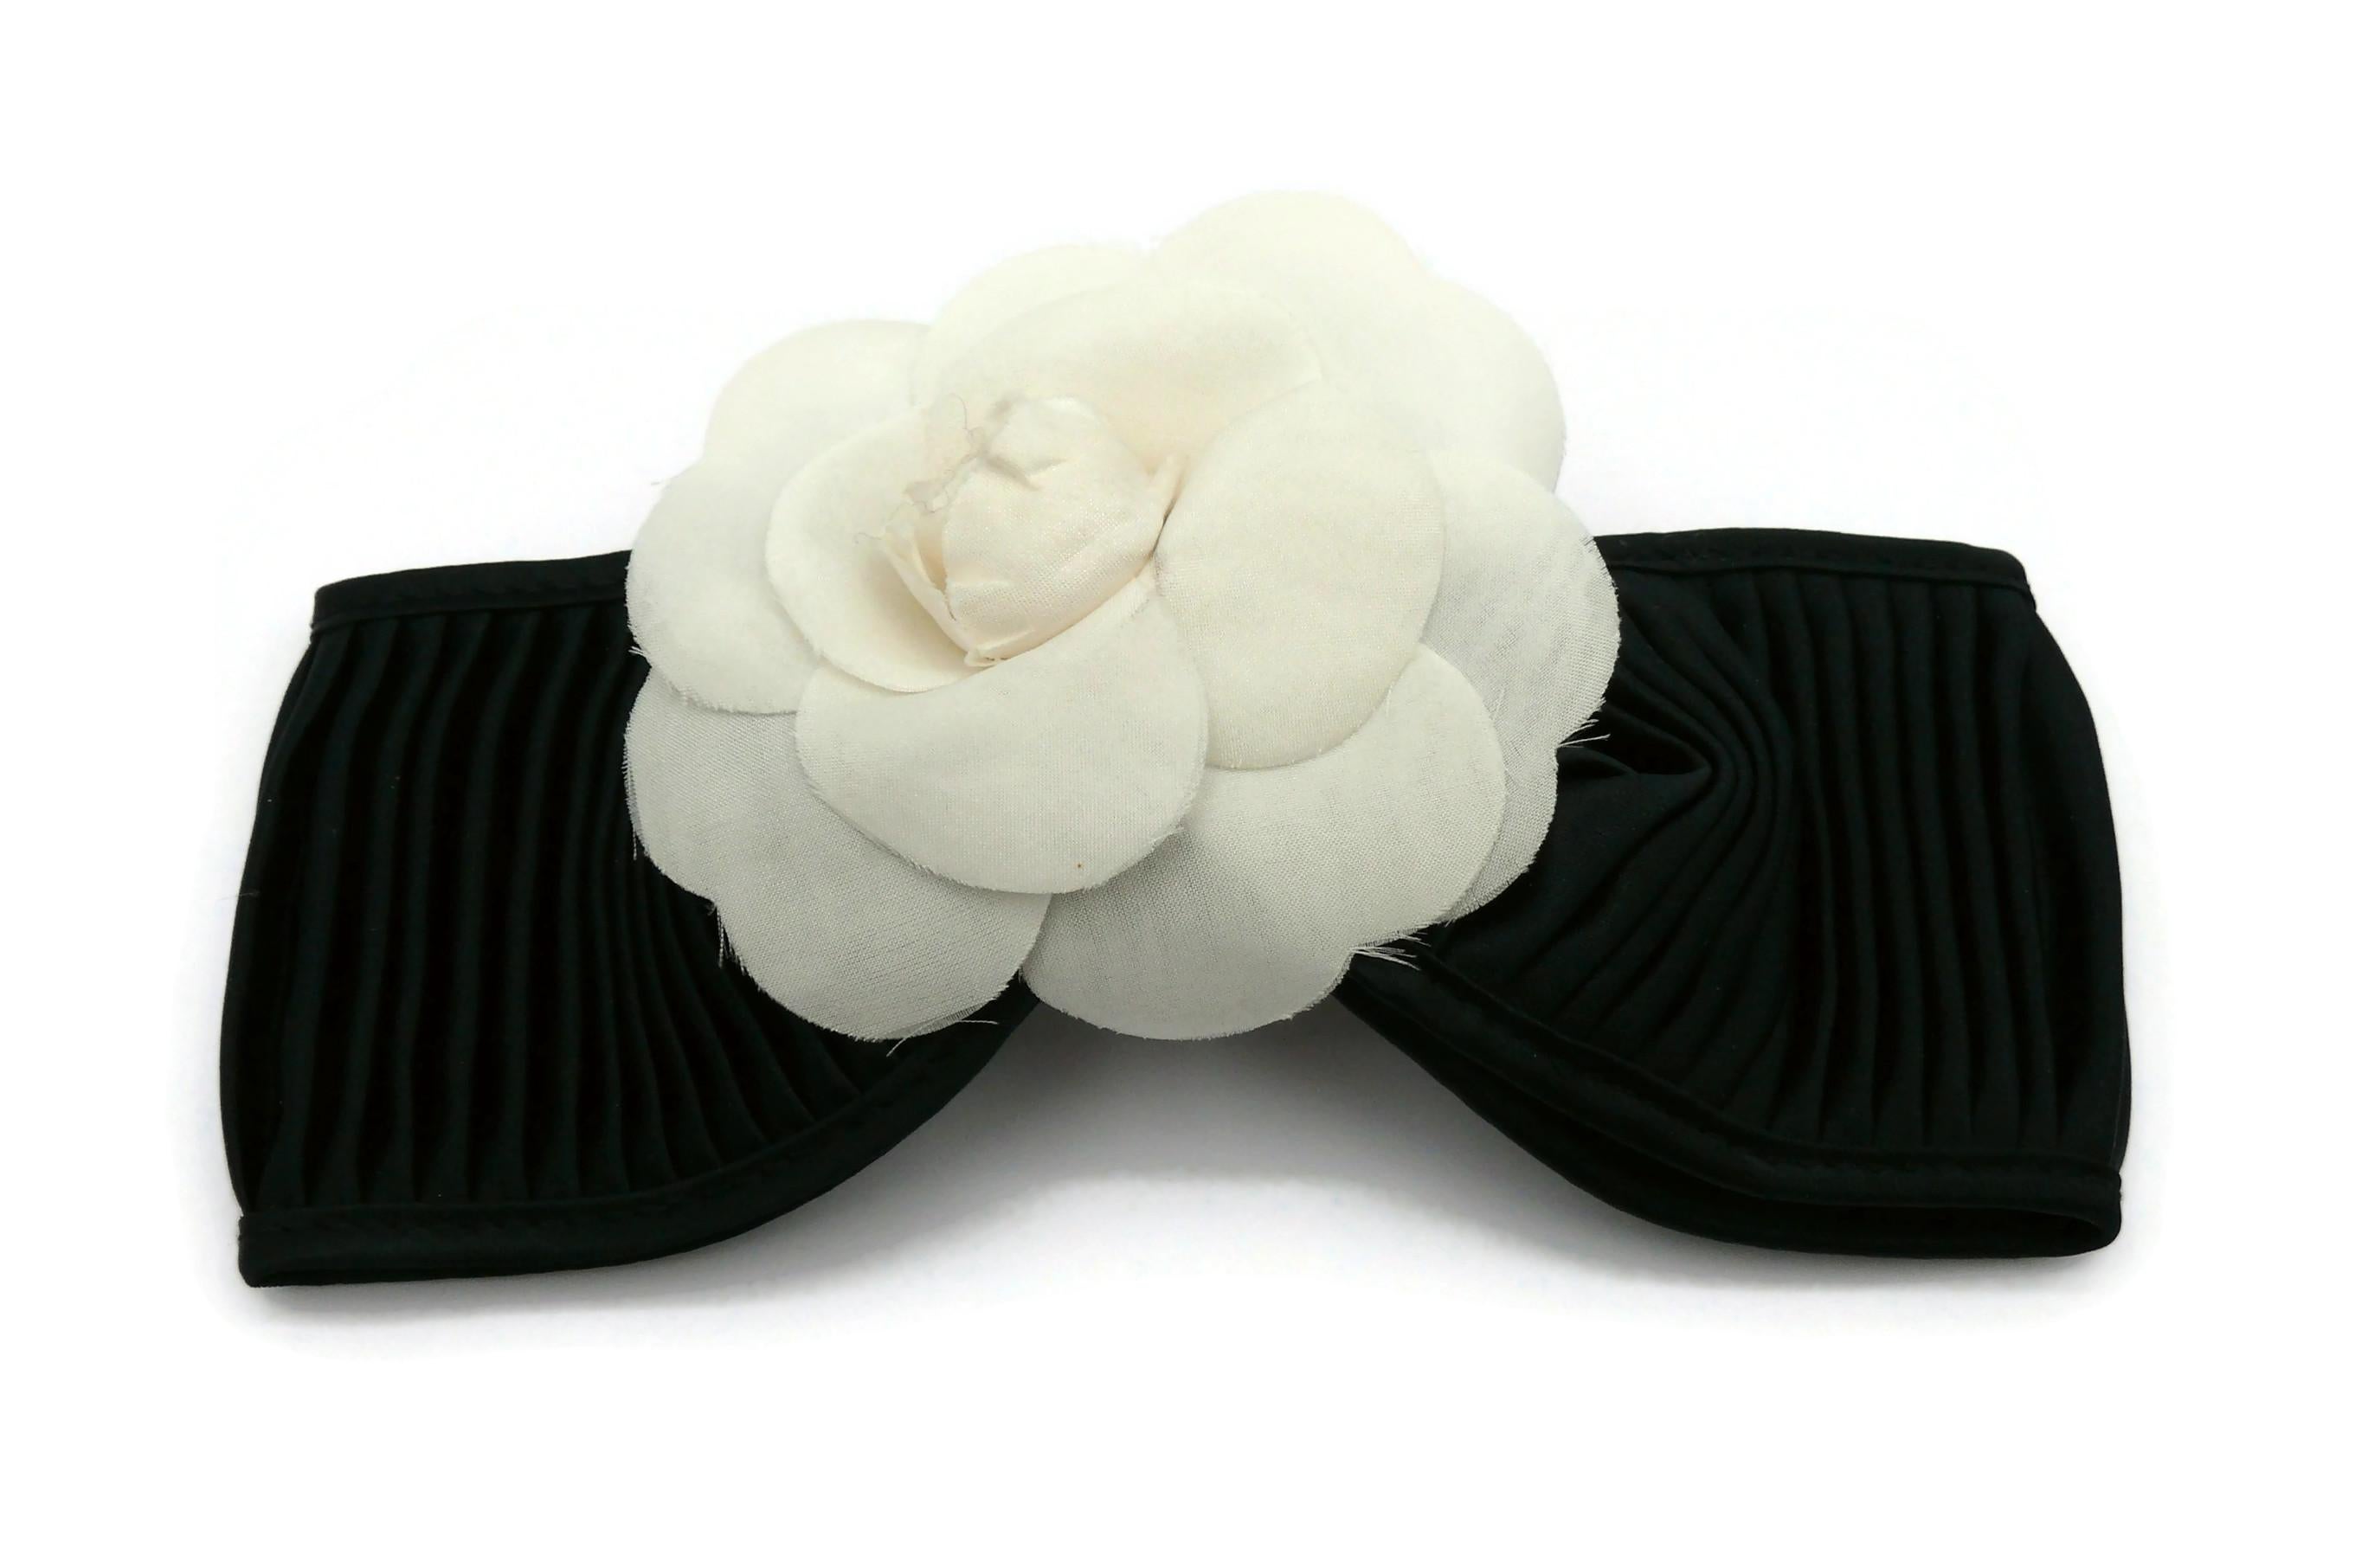 CHANEL vintage massive black and white fabric camellia bow hair clip.

Embossed CHANEL Made in France.

Indicative measurements : length approx. 17 cm (6.69 inches) / max. width approx. 7 cm (2.76 inches).

NOTES
- This is a preloved vintage item,